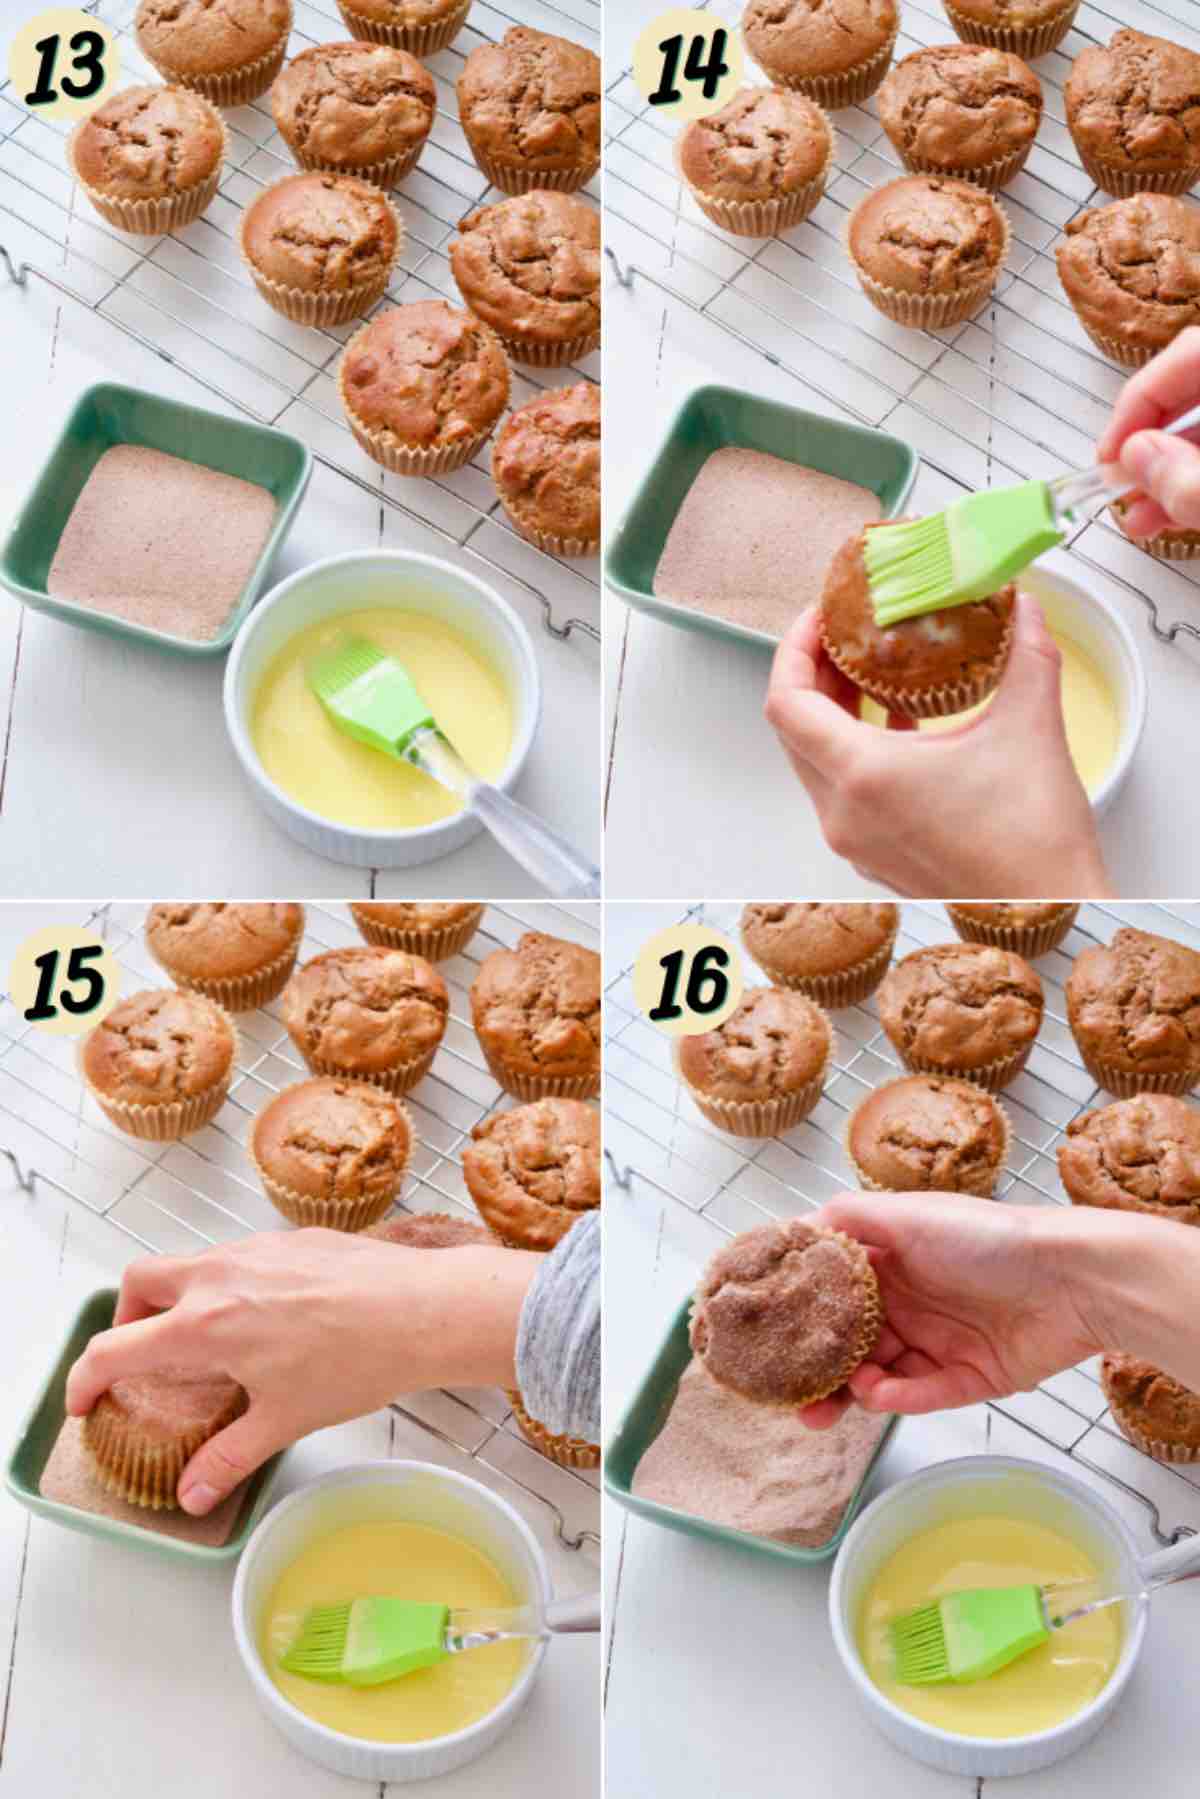 Topping baked apple muffins with cinnamon sugar.